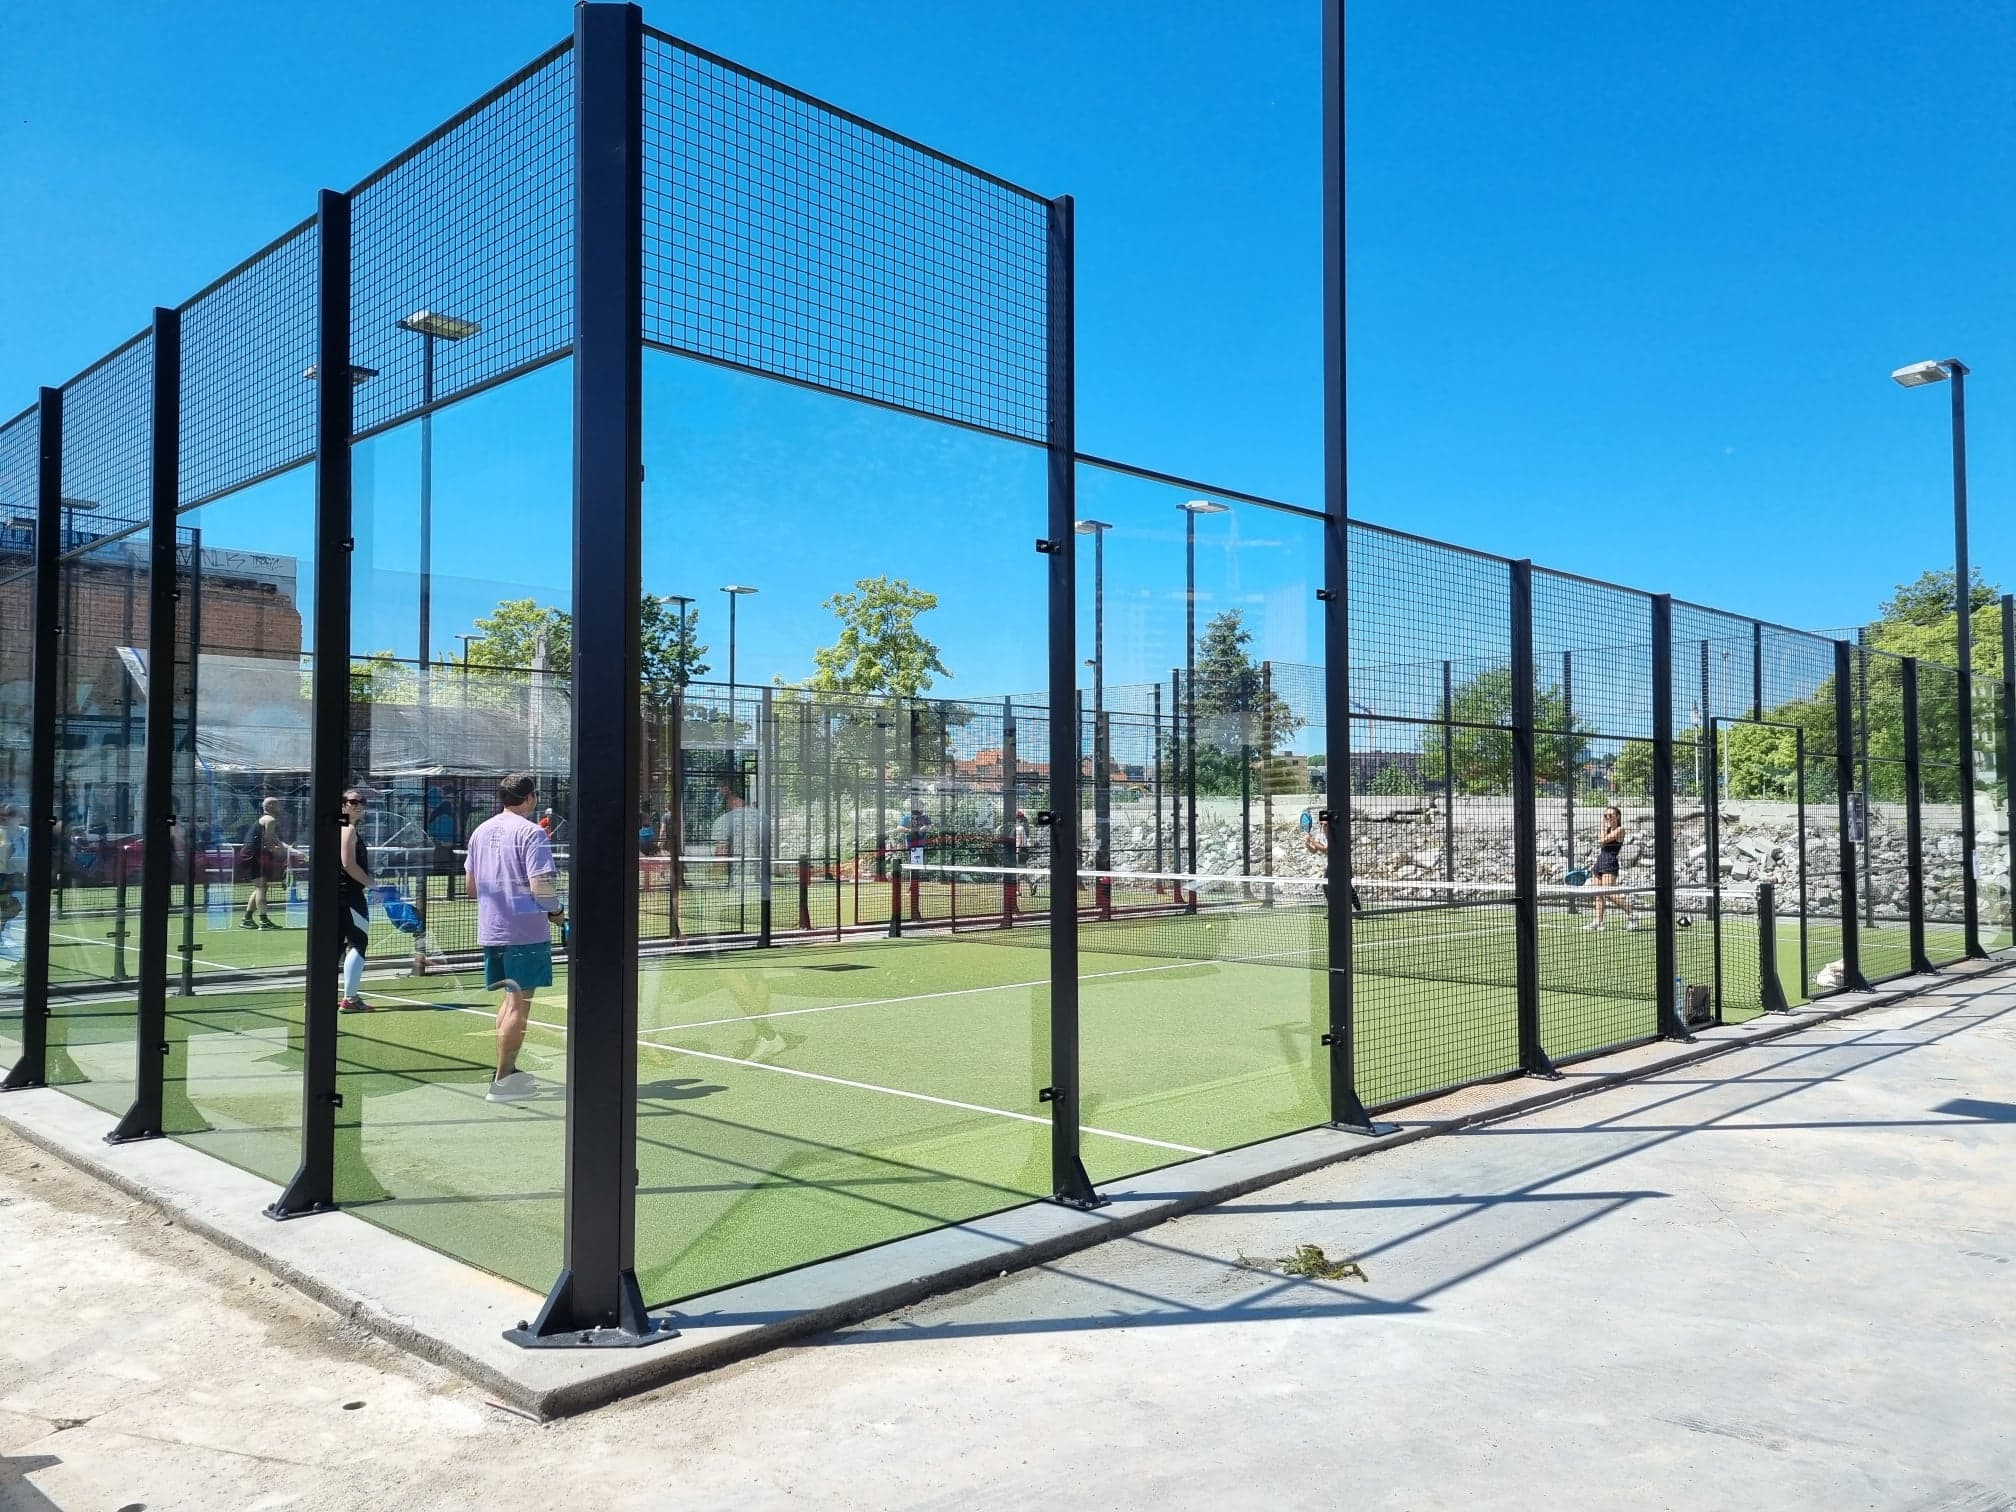 2021 wholesale price Padel Court Suppliers - Standard Type Cheap Buy Price Hot Selling 10x20m Paddle Court Padel Tennis Court  –  LVYIN